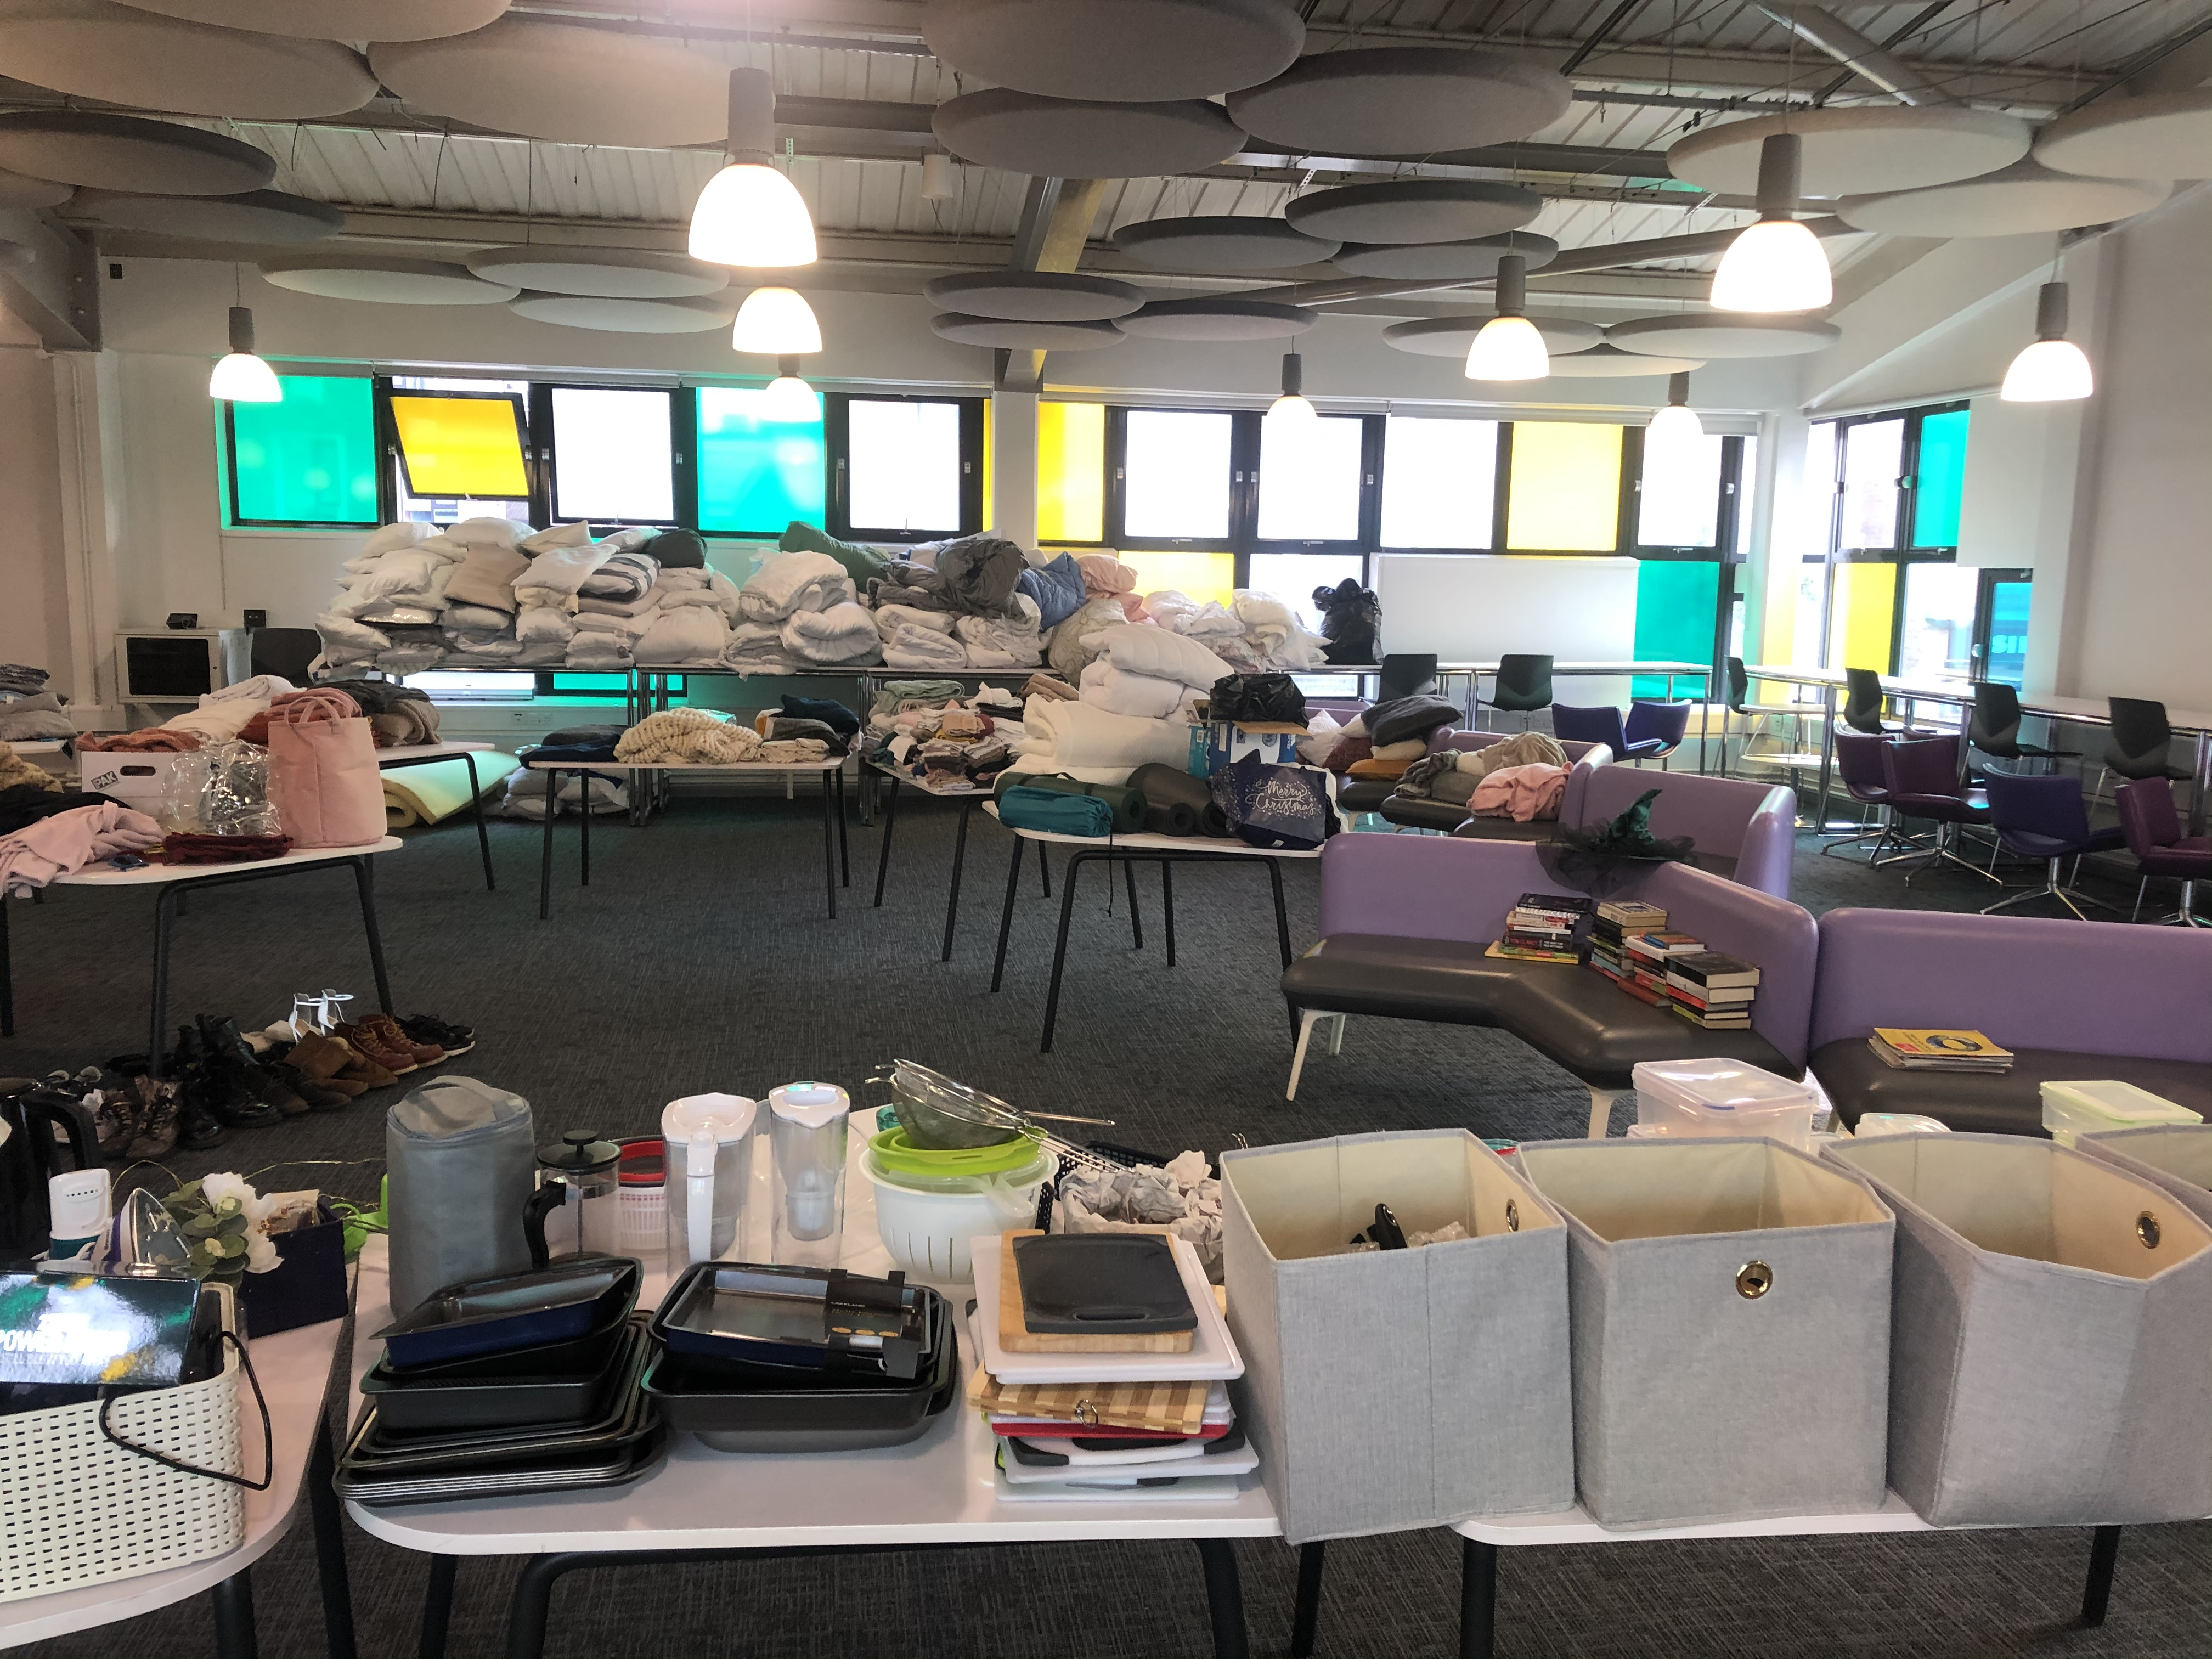 An image showing bedding, crockery and electrical items arranged on tables at the September 2021 Reuse Fair